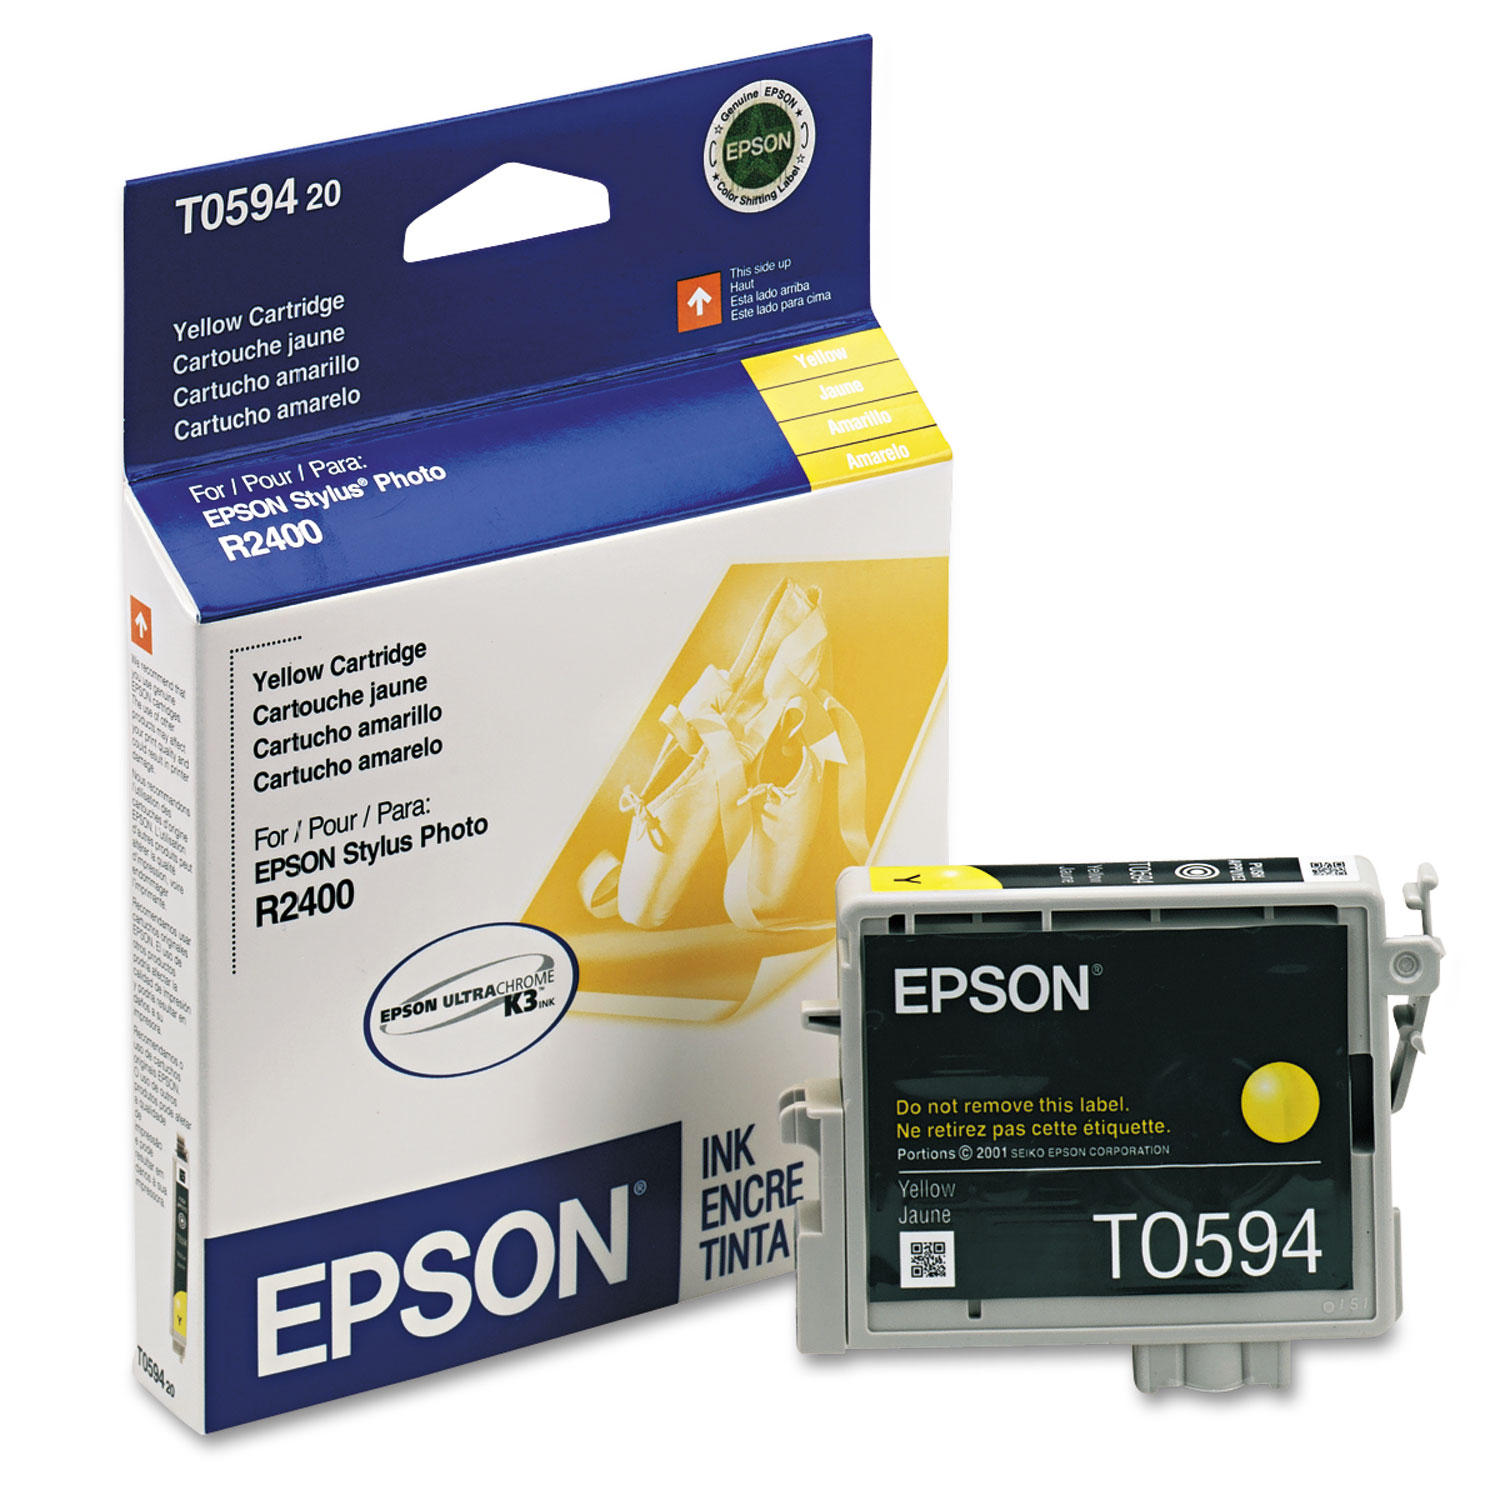  Epson T059420 T059420 (59) UltraChrome K3 Ink, 450 Page-Yield, Yellow (EPST059420) 